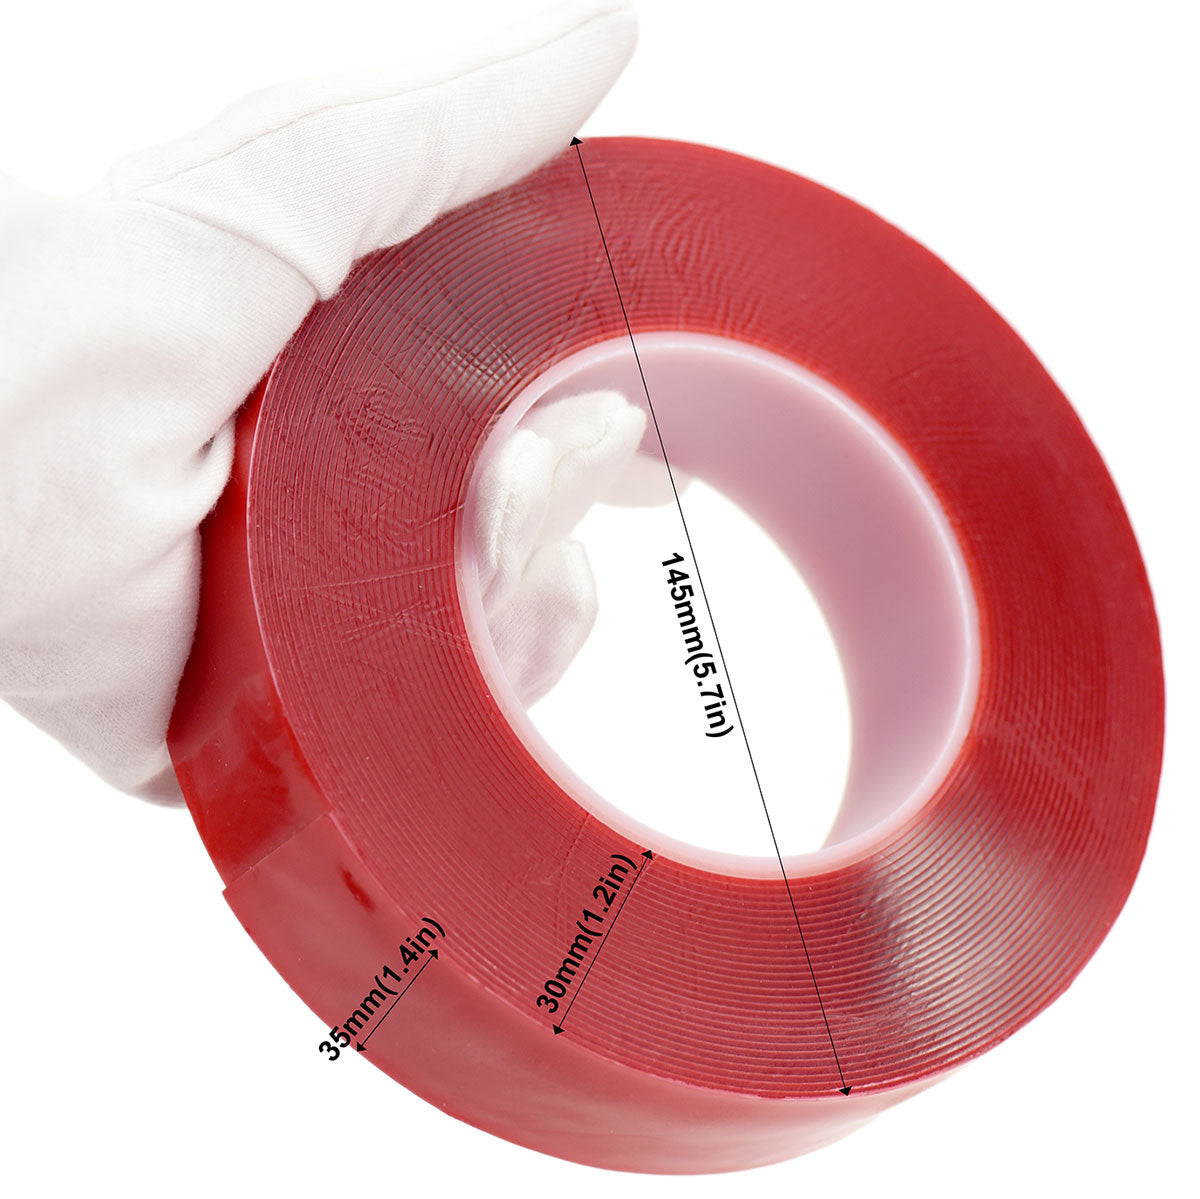 35mm x 1mm x 10 meters Multi-Purpose High Strength Transparent Acrylic Gel Adhesive Double Sided Tape Roll No Residue